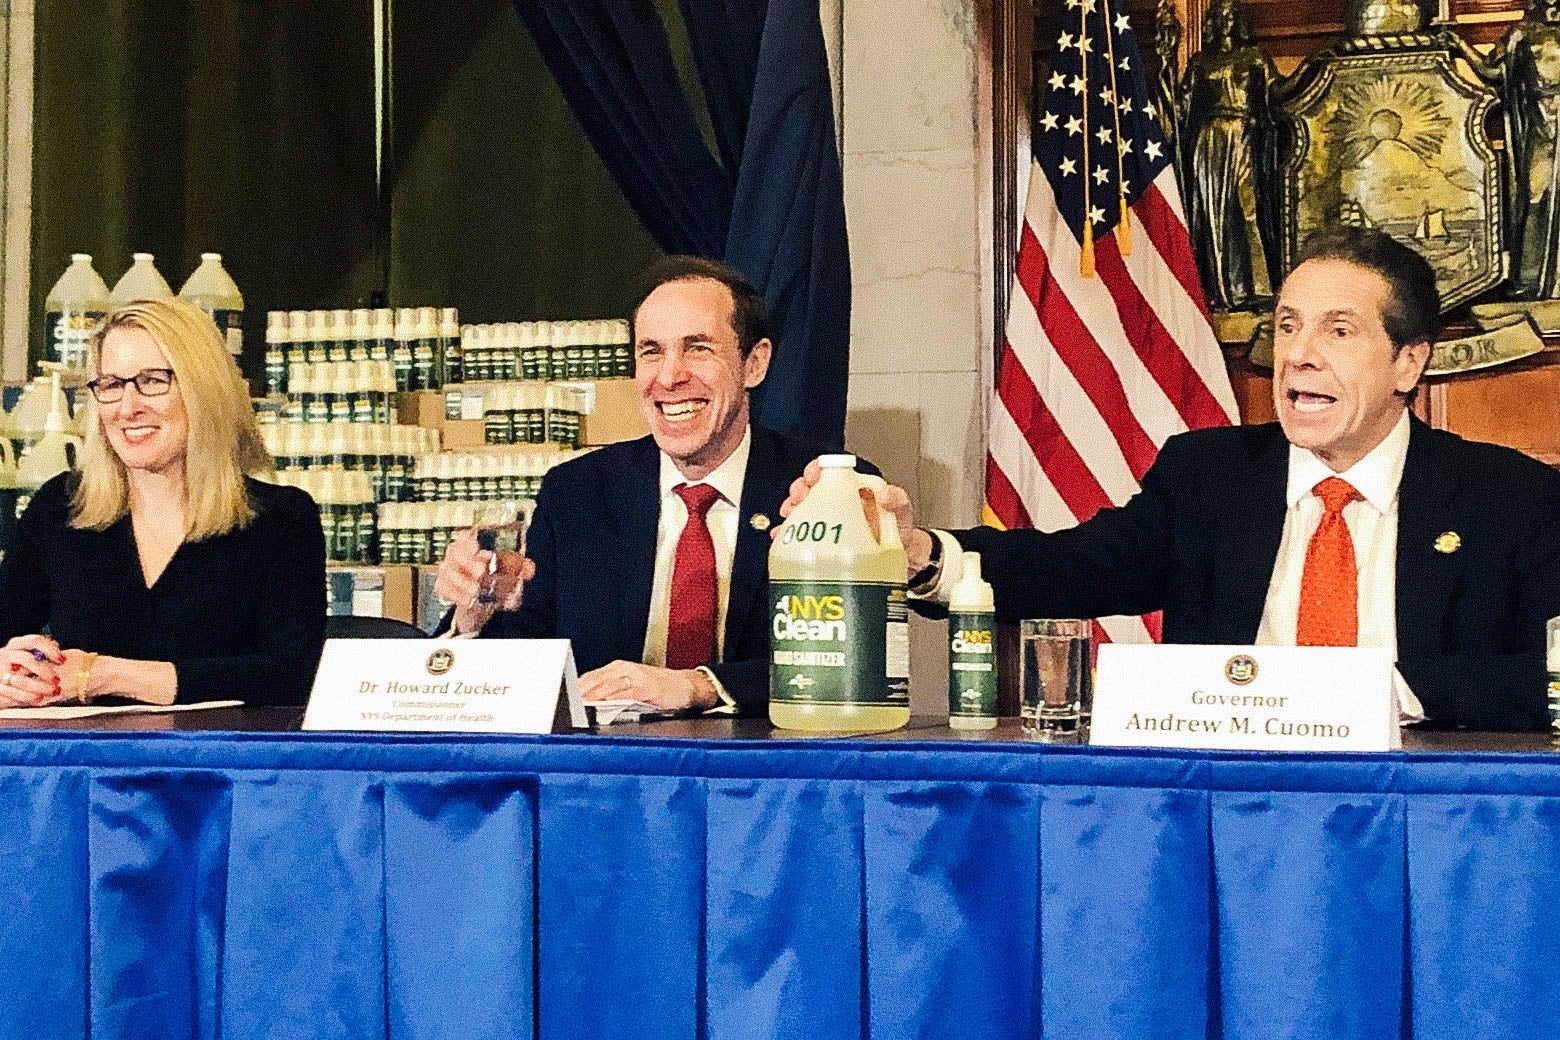 Cuomo, seated beside Dr. Howard Zucker on a panel, presents a jug of hand sanitizer at a briefing.